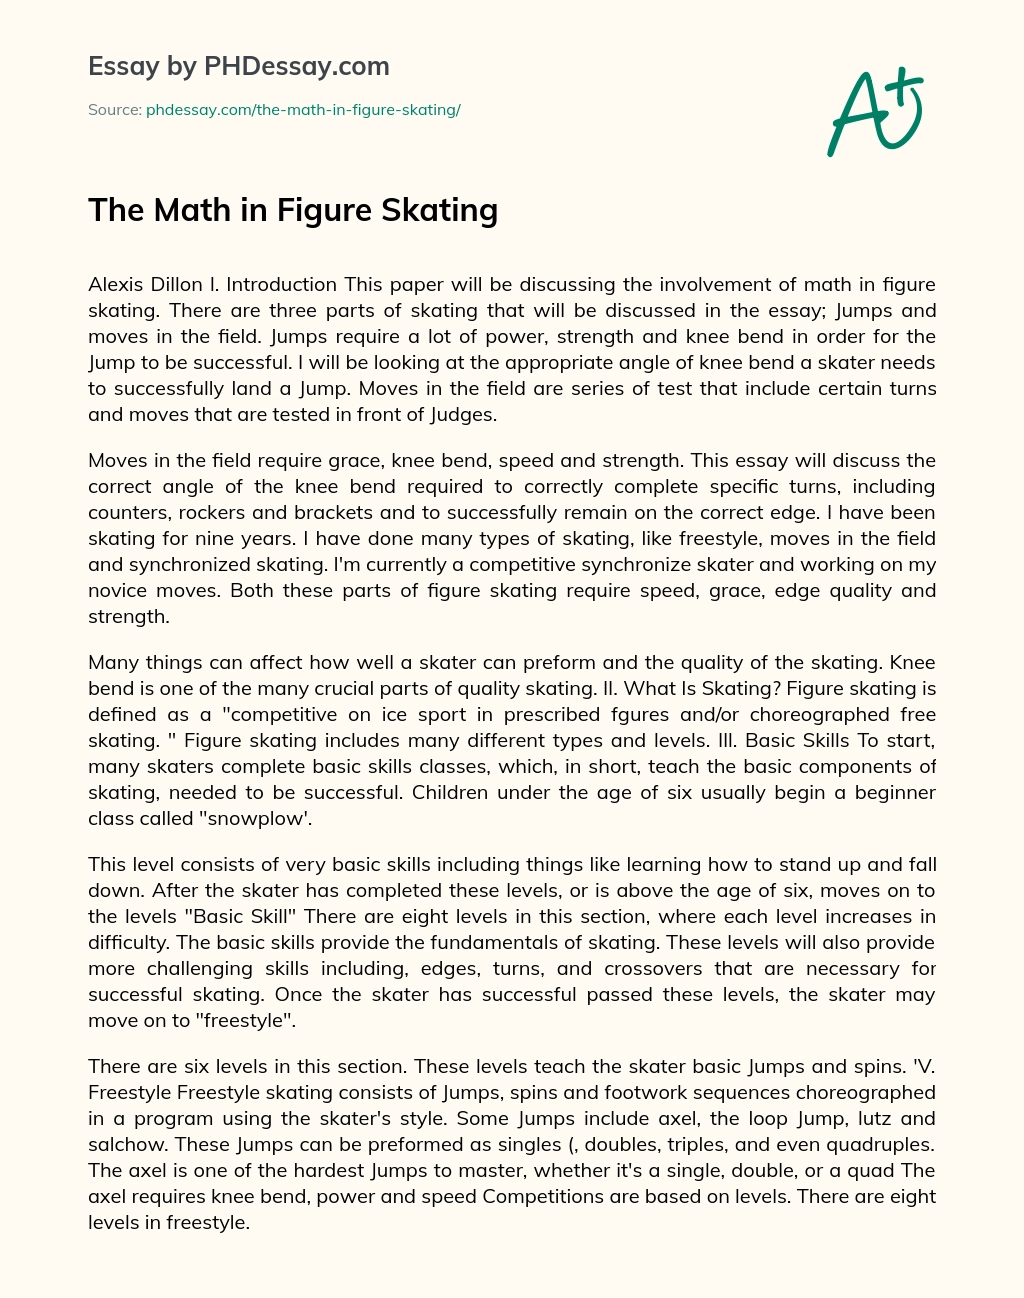 The Math in Figure Skating essay